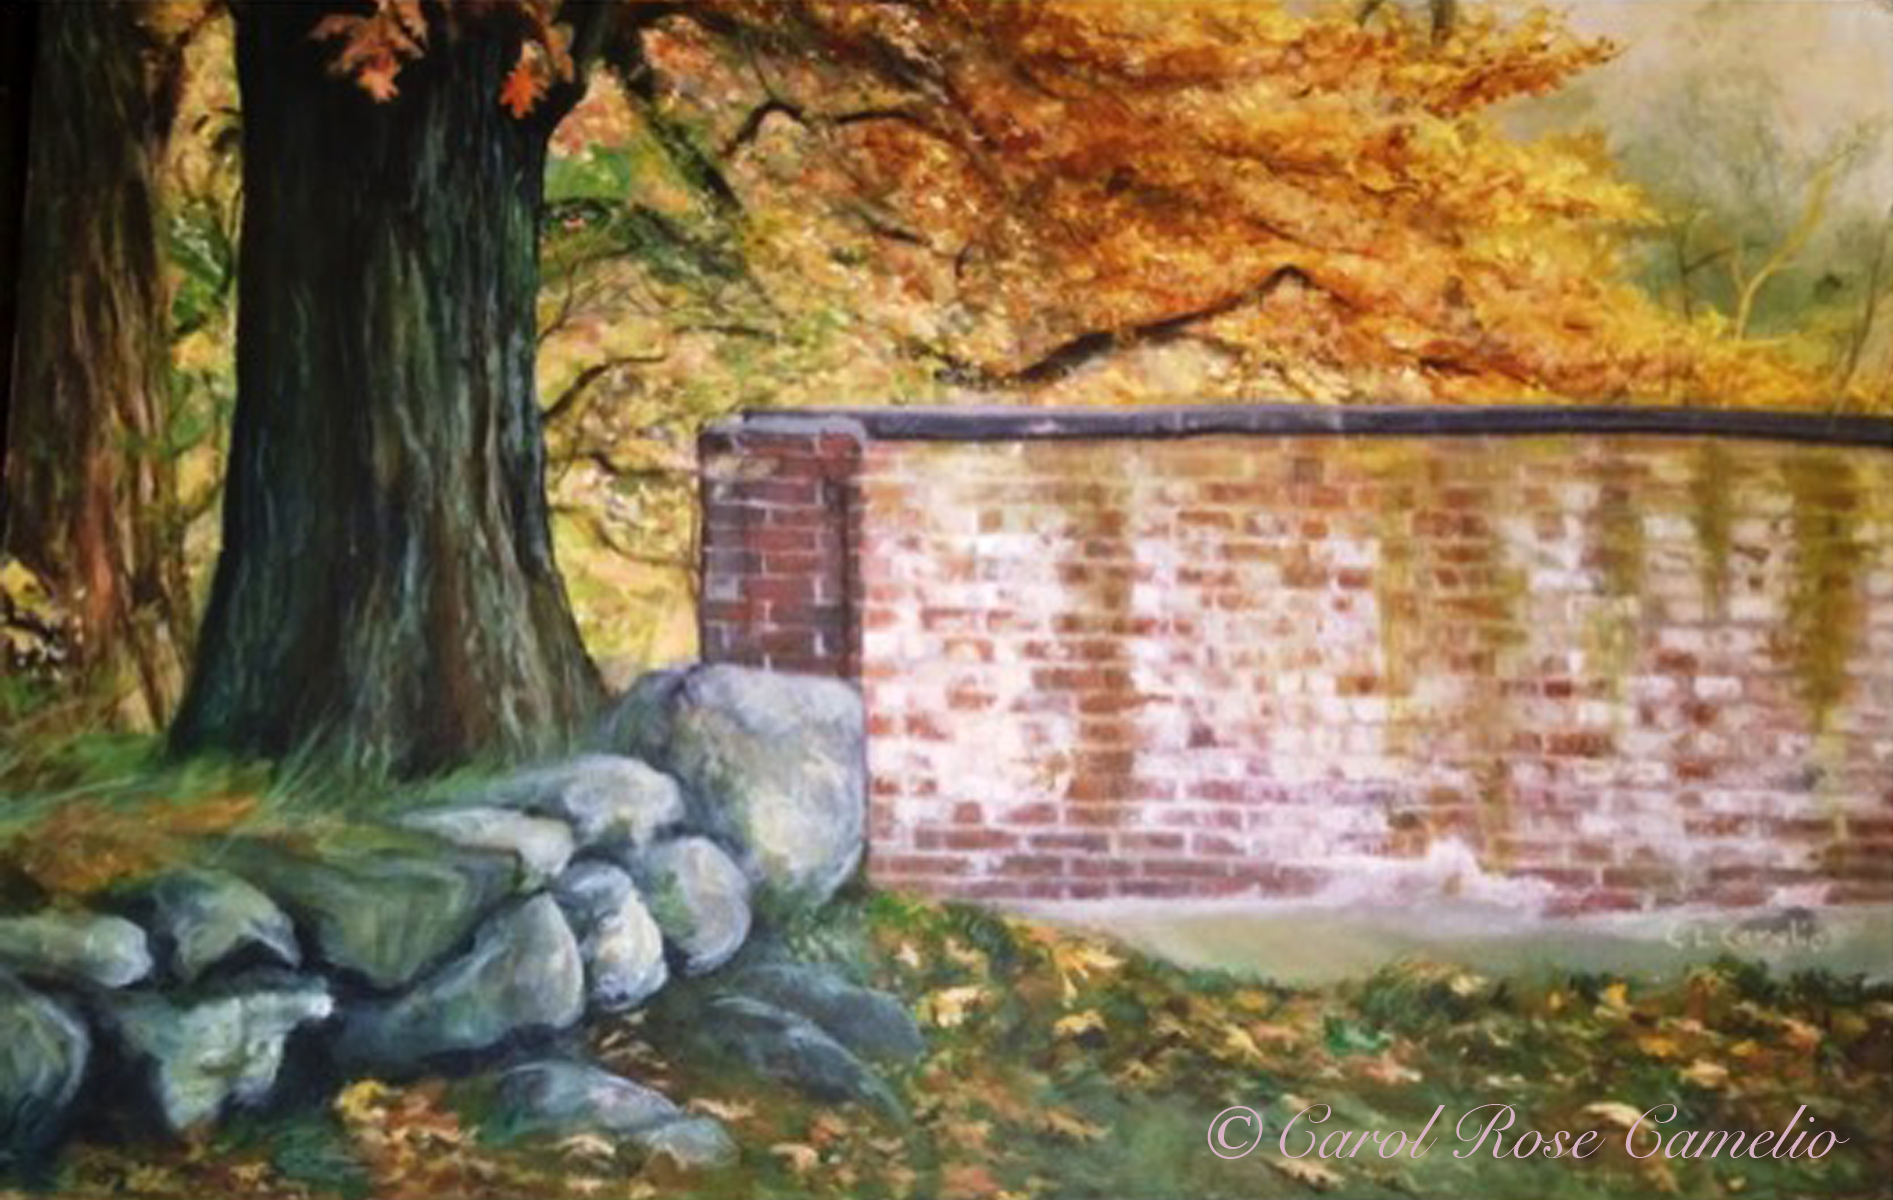 Slave Wall: A section of brick wall and a smaller stone wall, surrounded by autumn foliage.